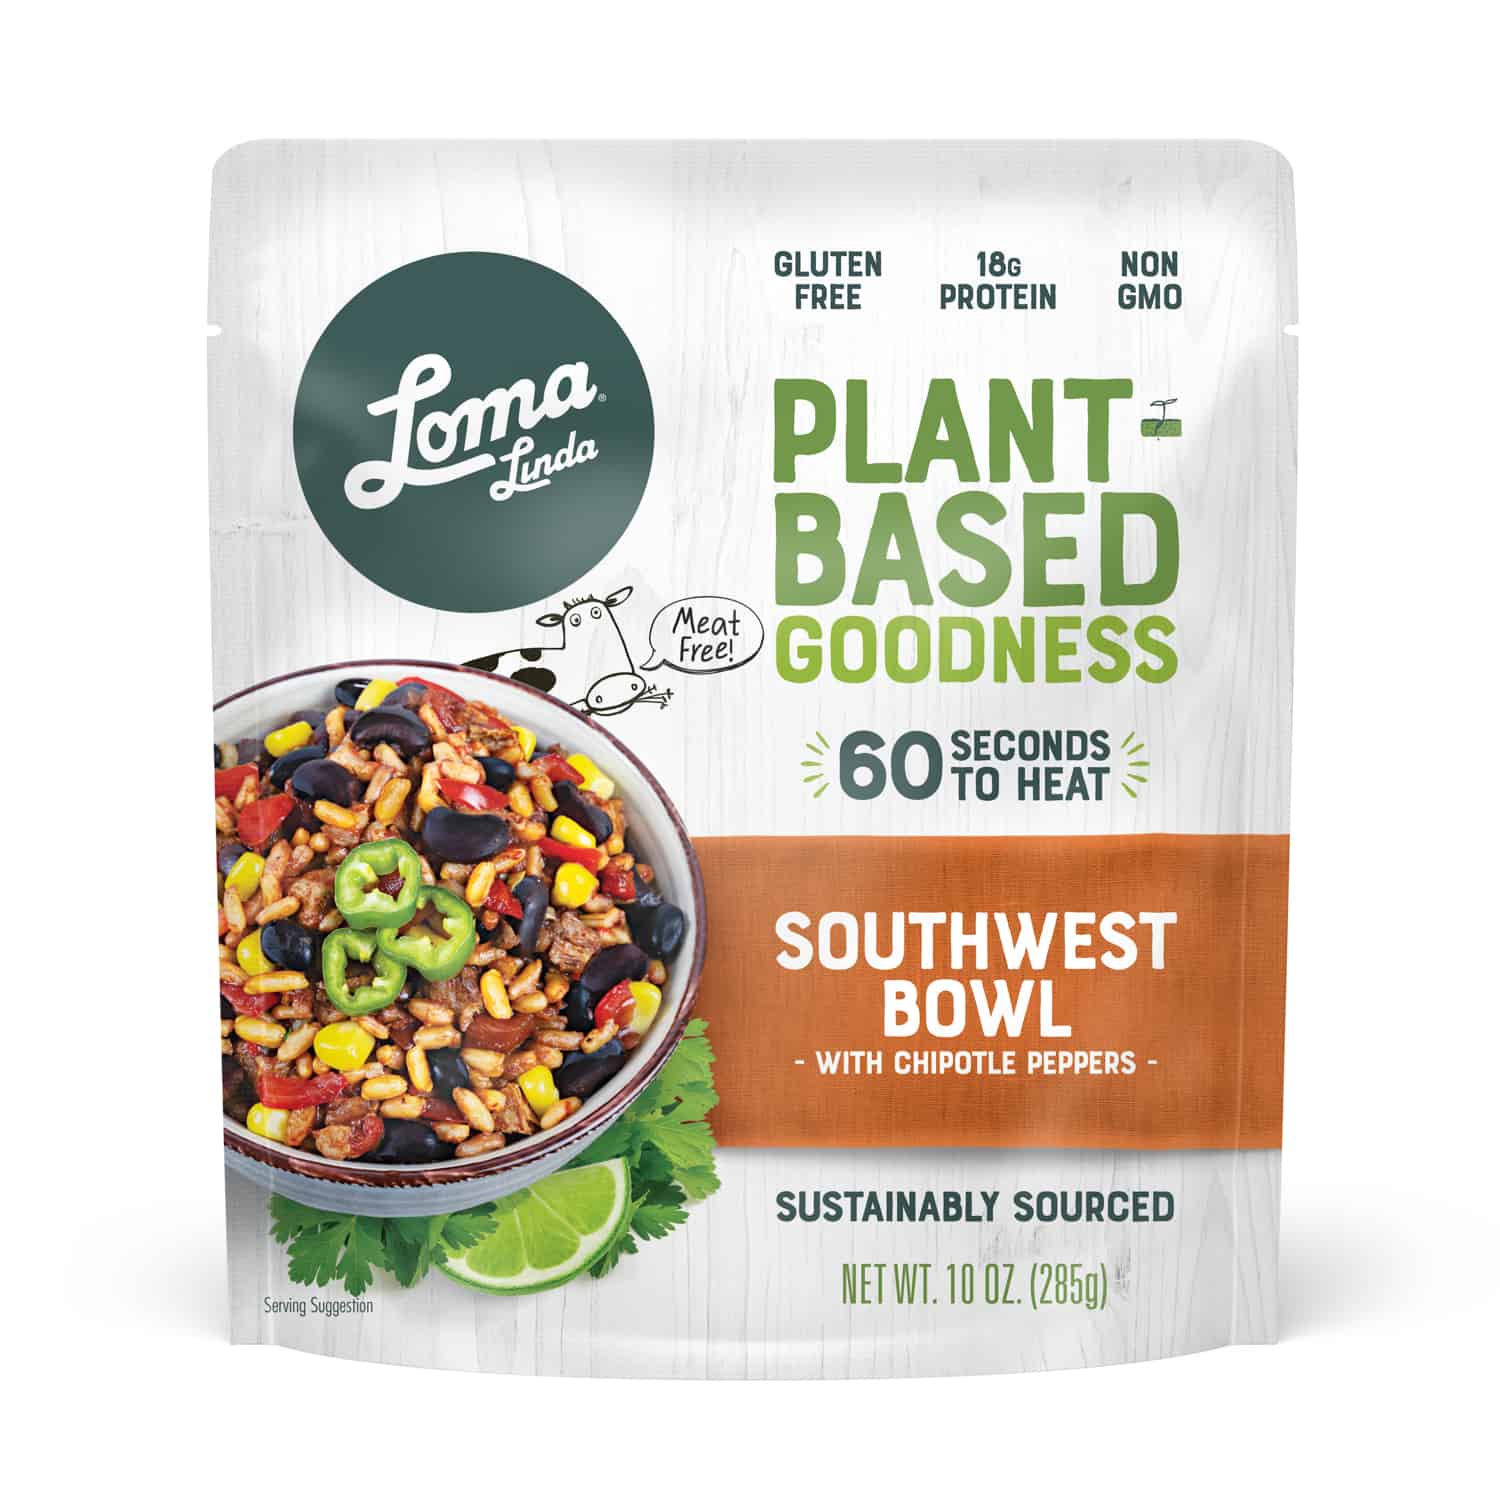 Southwest Bowl with Chipotle Peppers by Loma Linda - GTFO It's Vegan